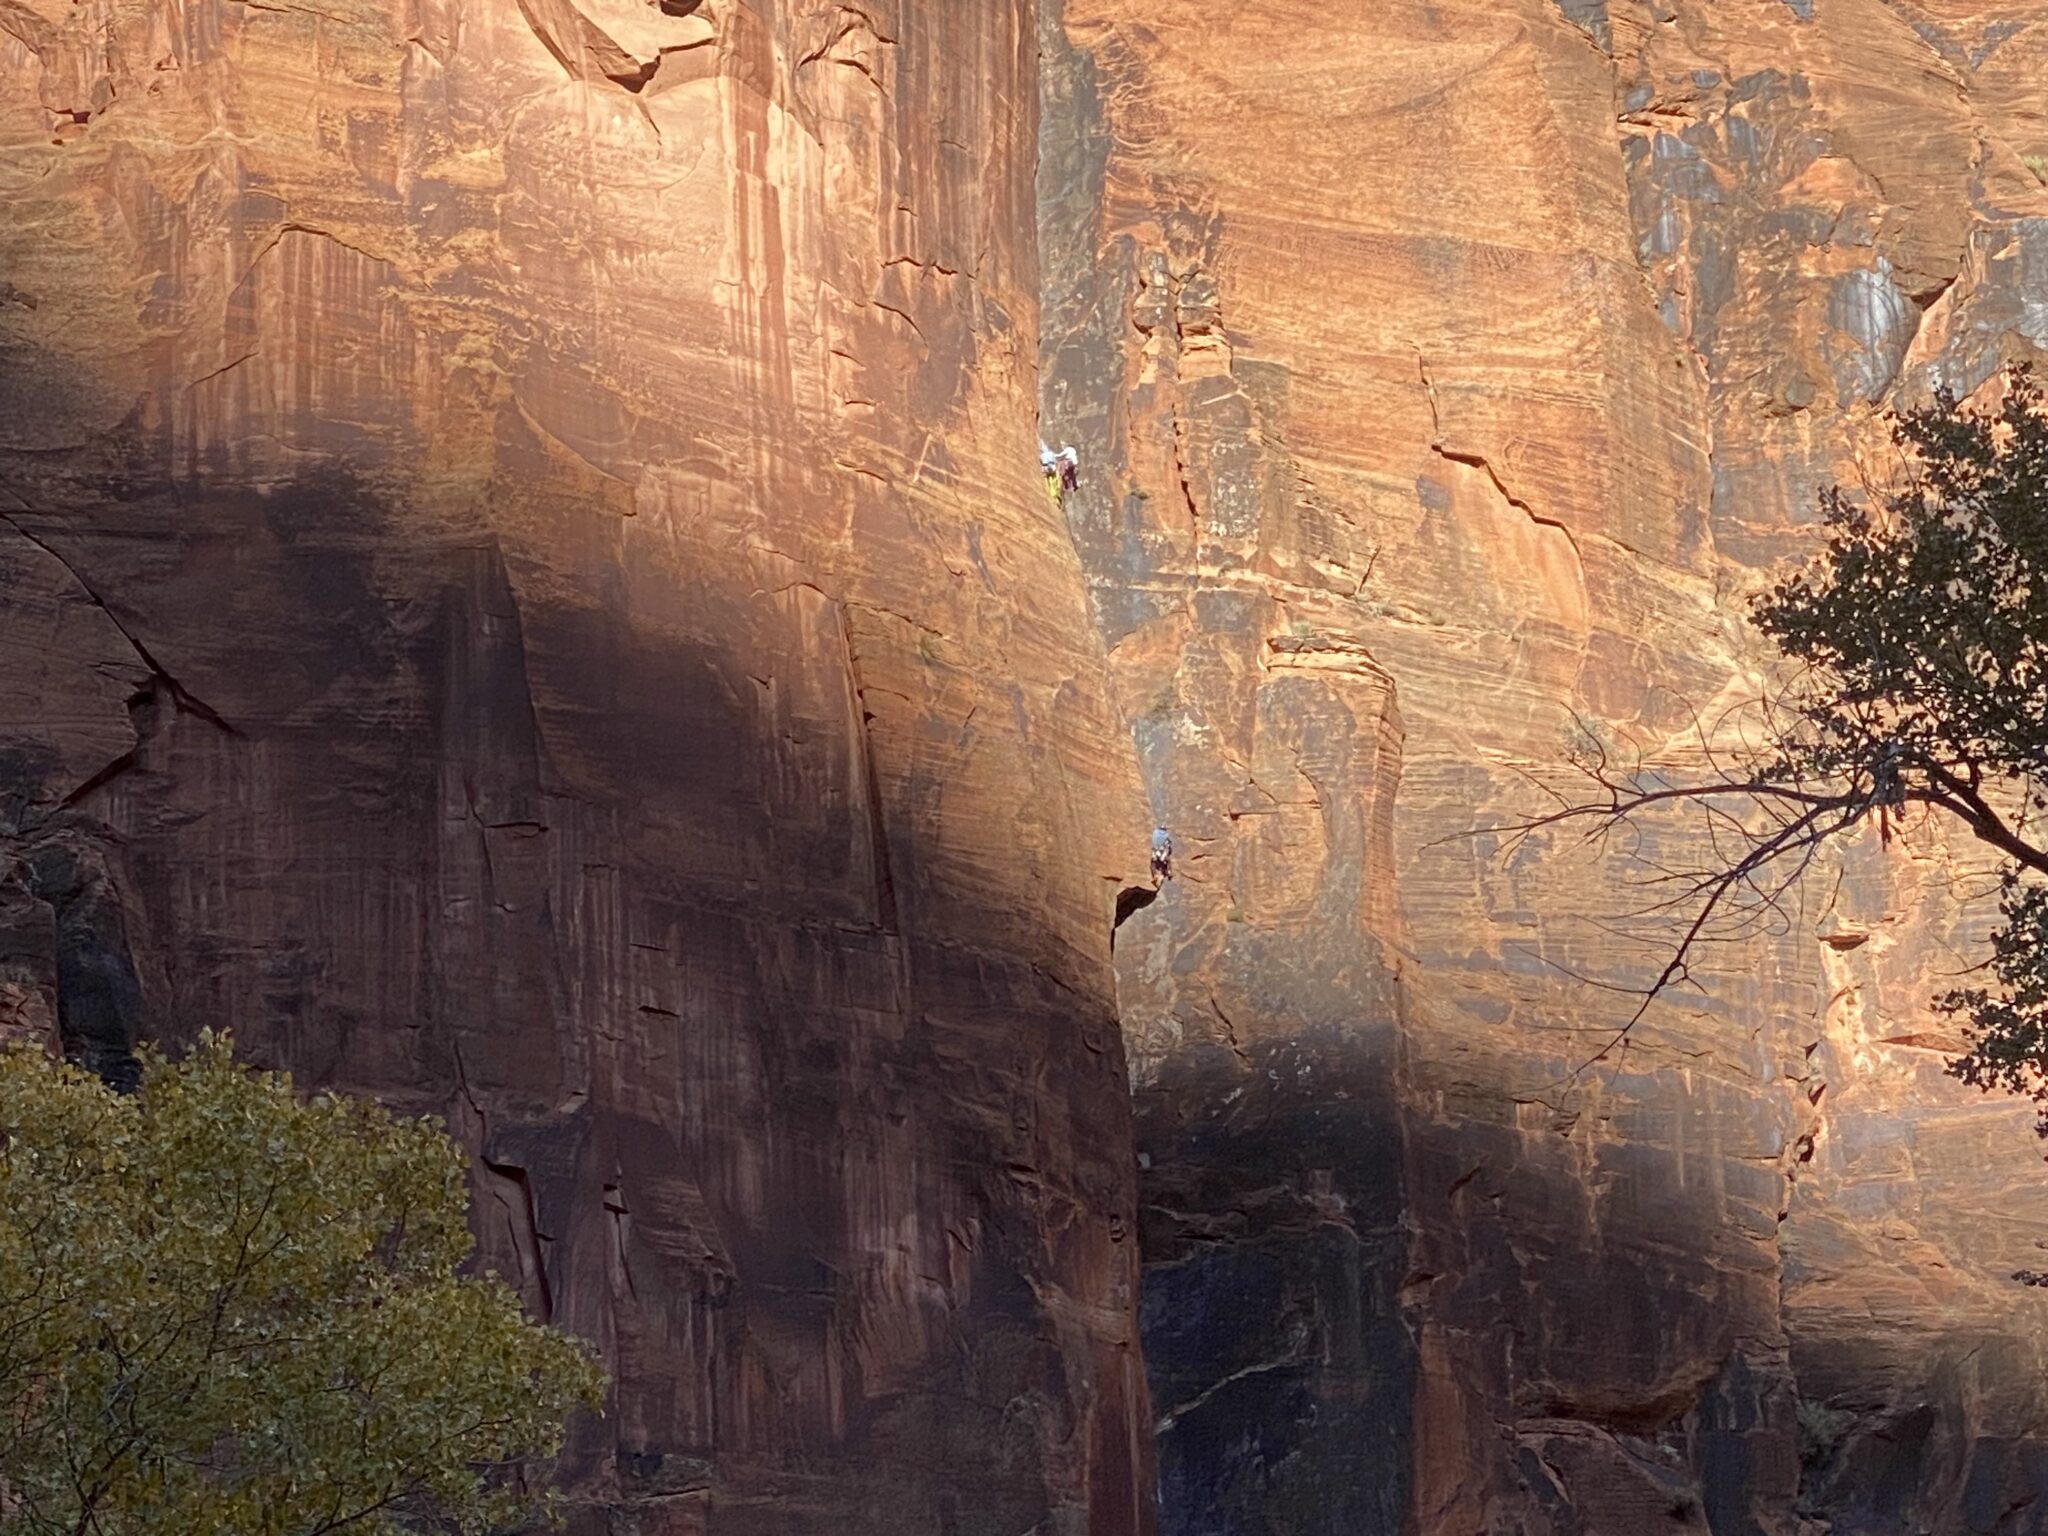 Watching Rock Climbers at Monkey Fingers in Zion